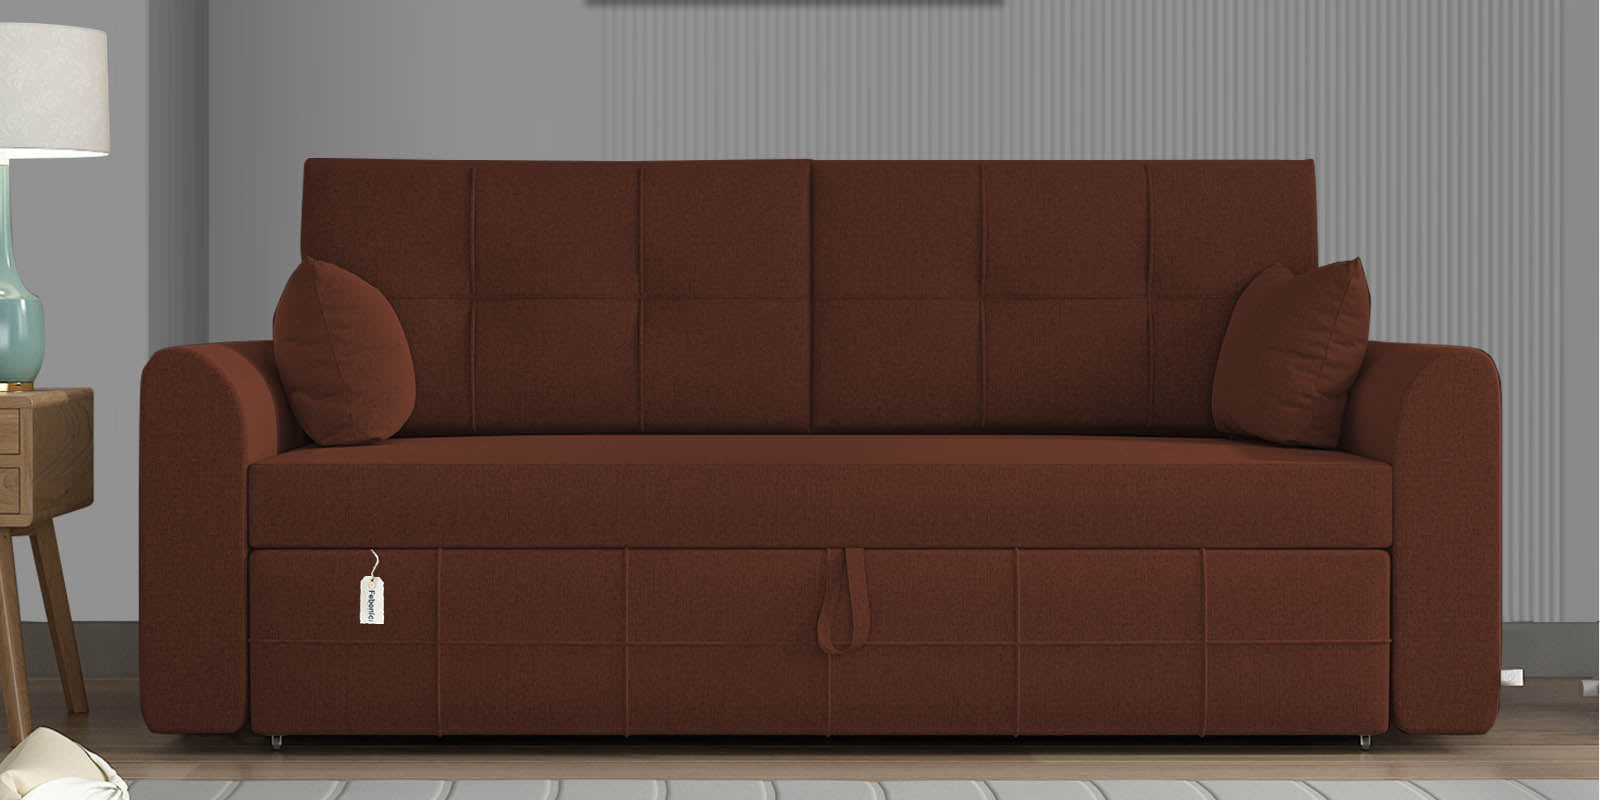 Kolee Fabric 3 Seater Pull Out Sofa Cum Bed In Coffee Brown Colour